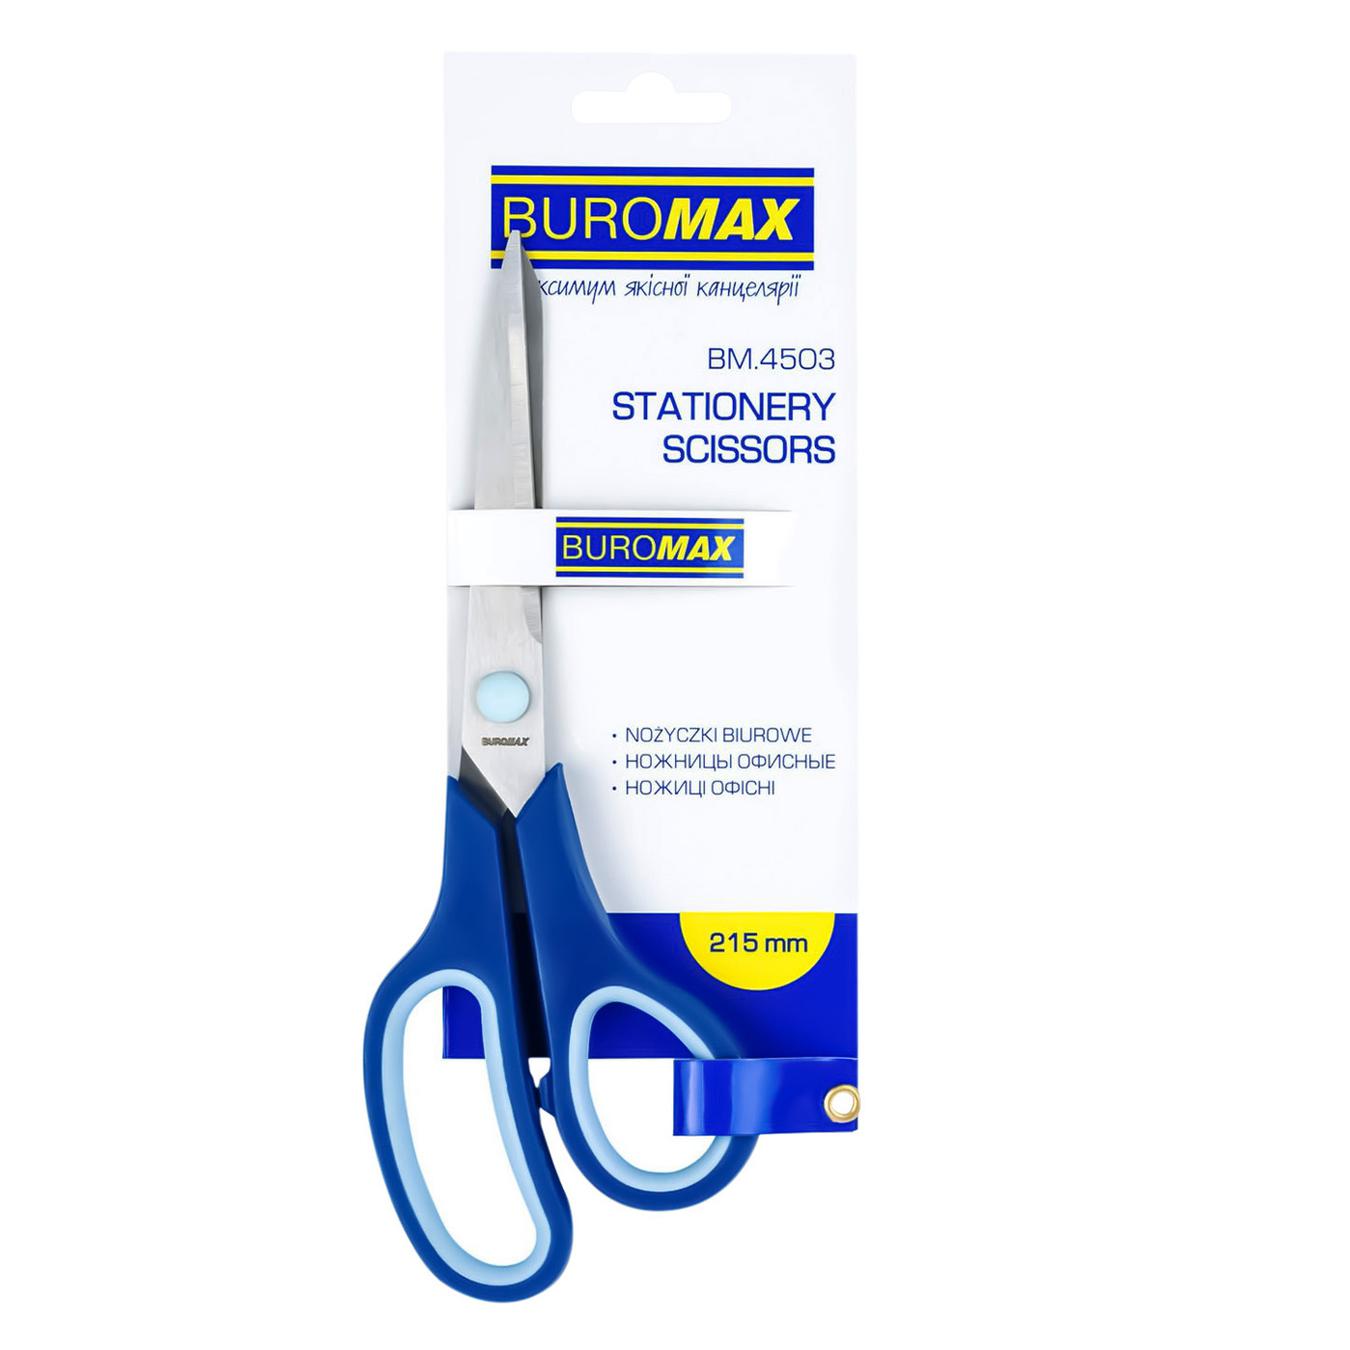 BuroMax scissors with rubber inserts 215 mm